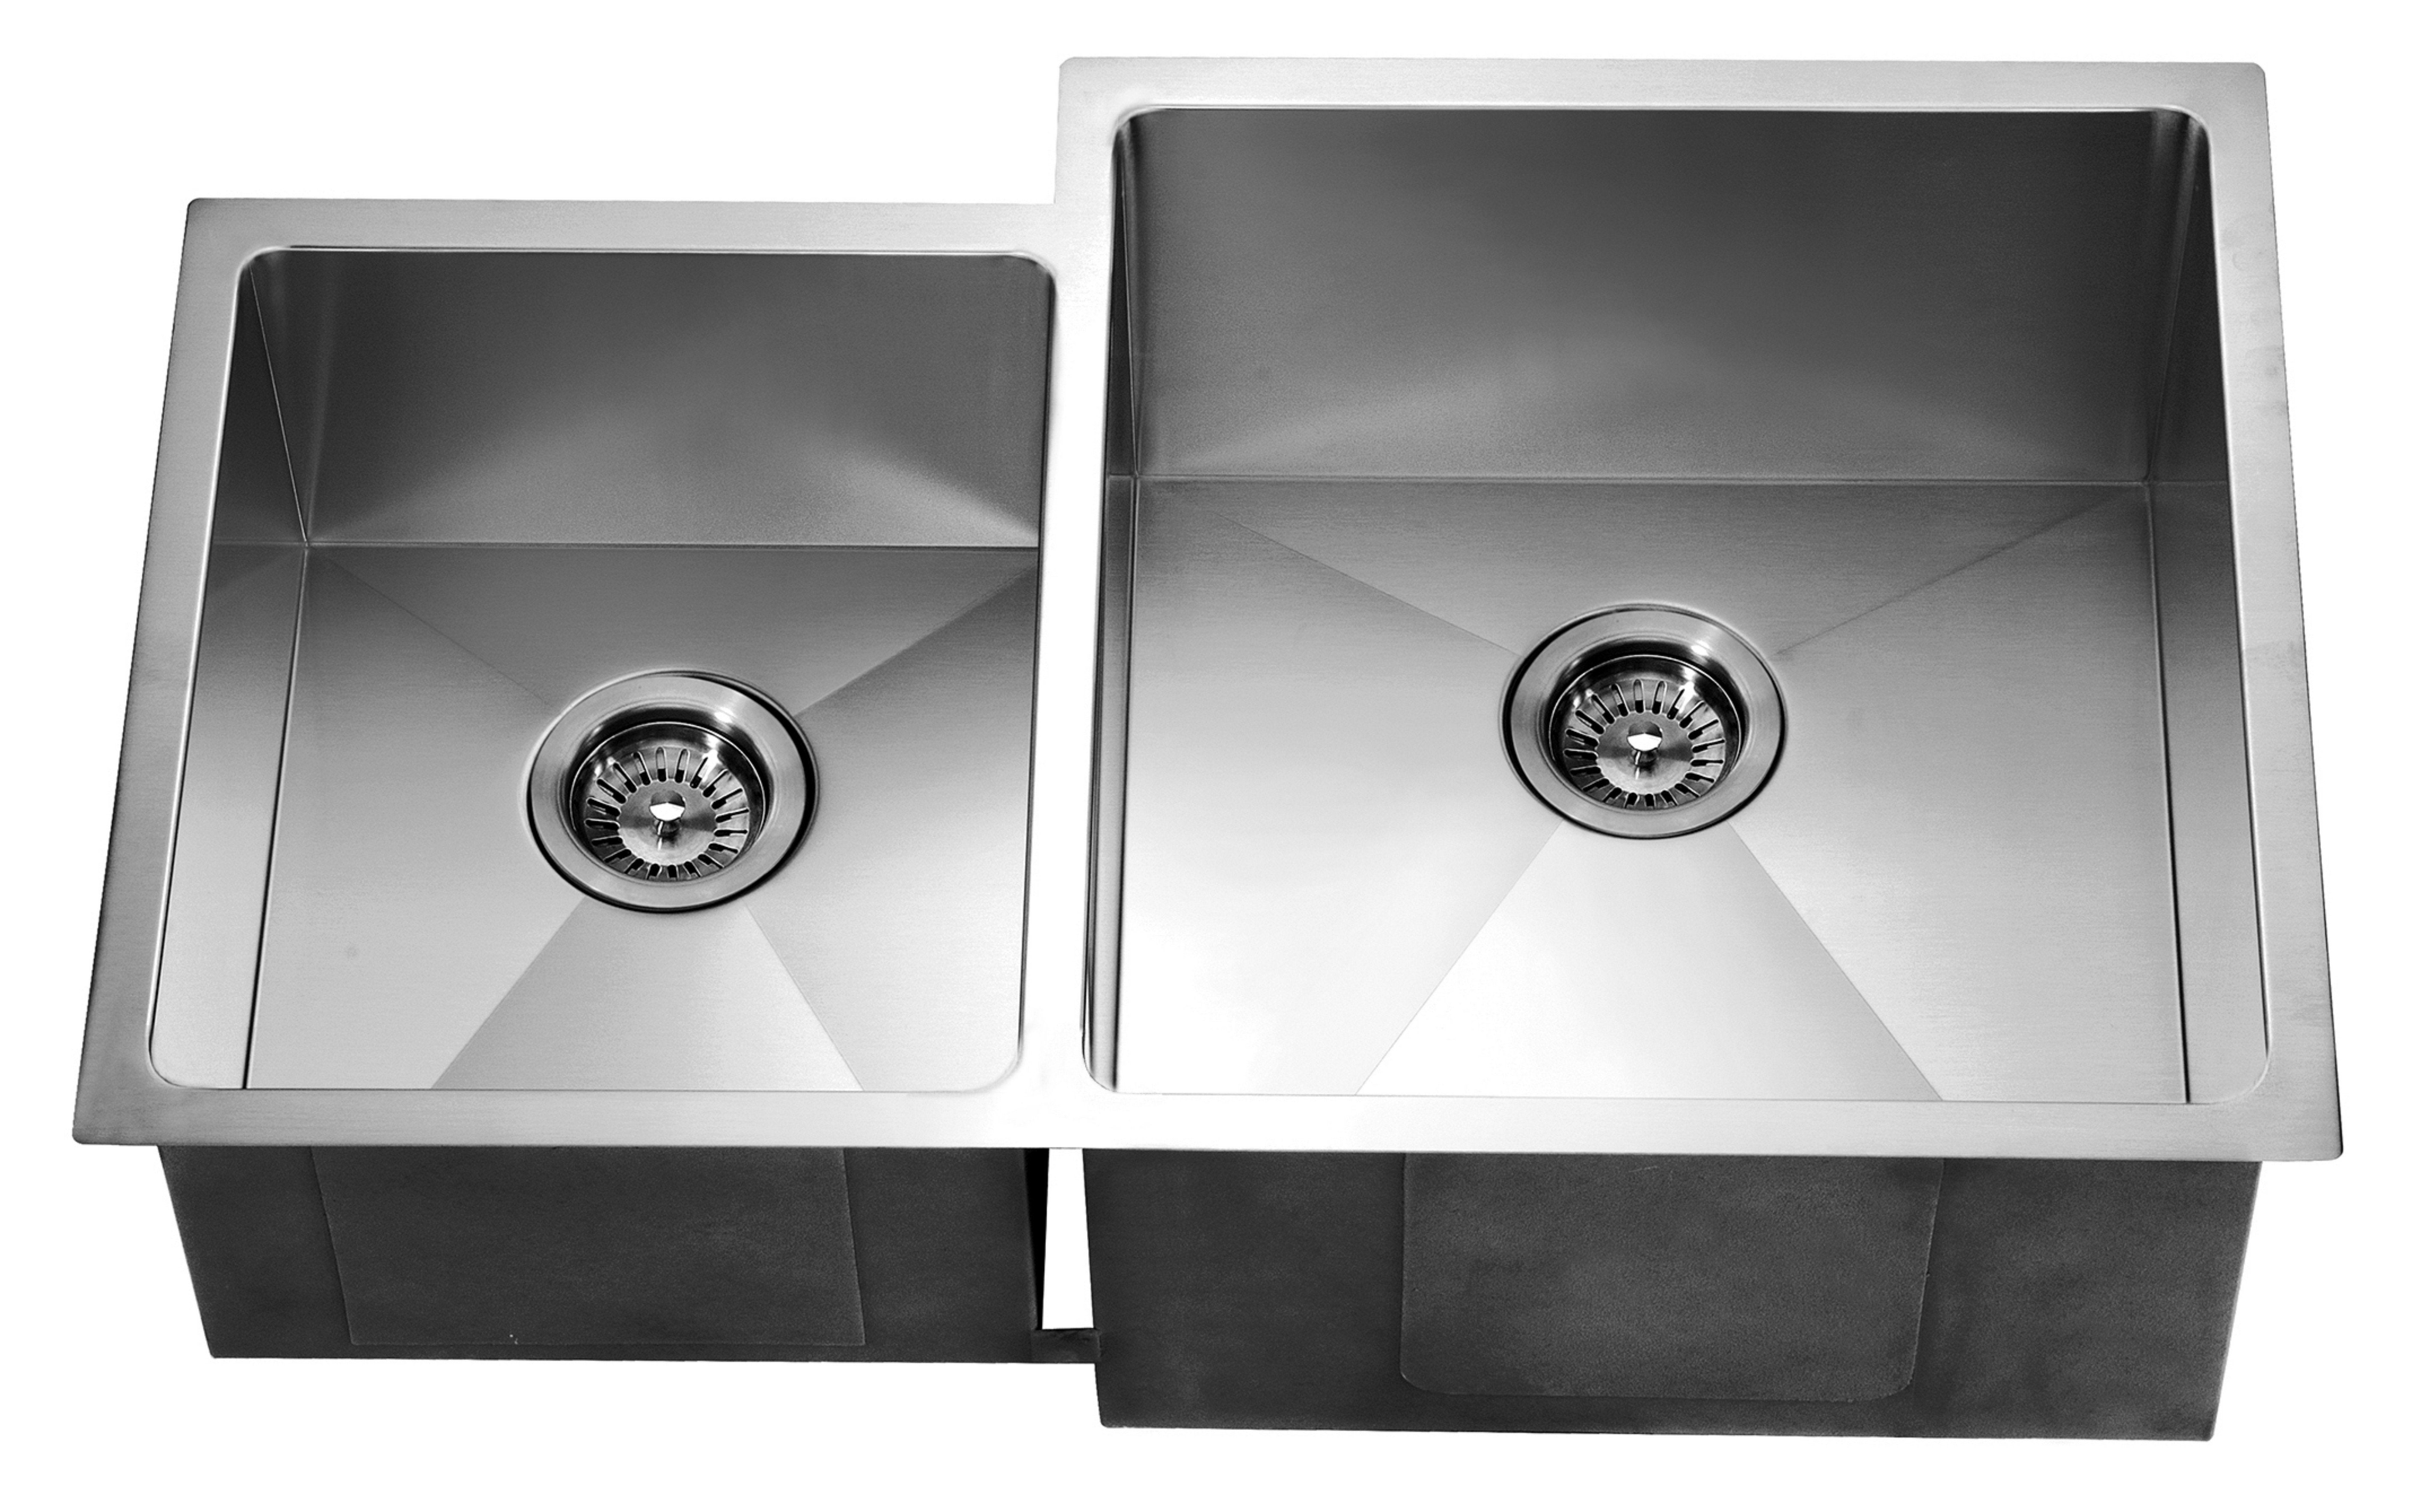 33" Double Bowl Dual Mount 18 Gauge Stainless Steel Kitchen Sink-Kitchen Sinks Fast Shipping at DirectSinks.